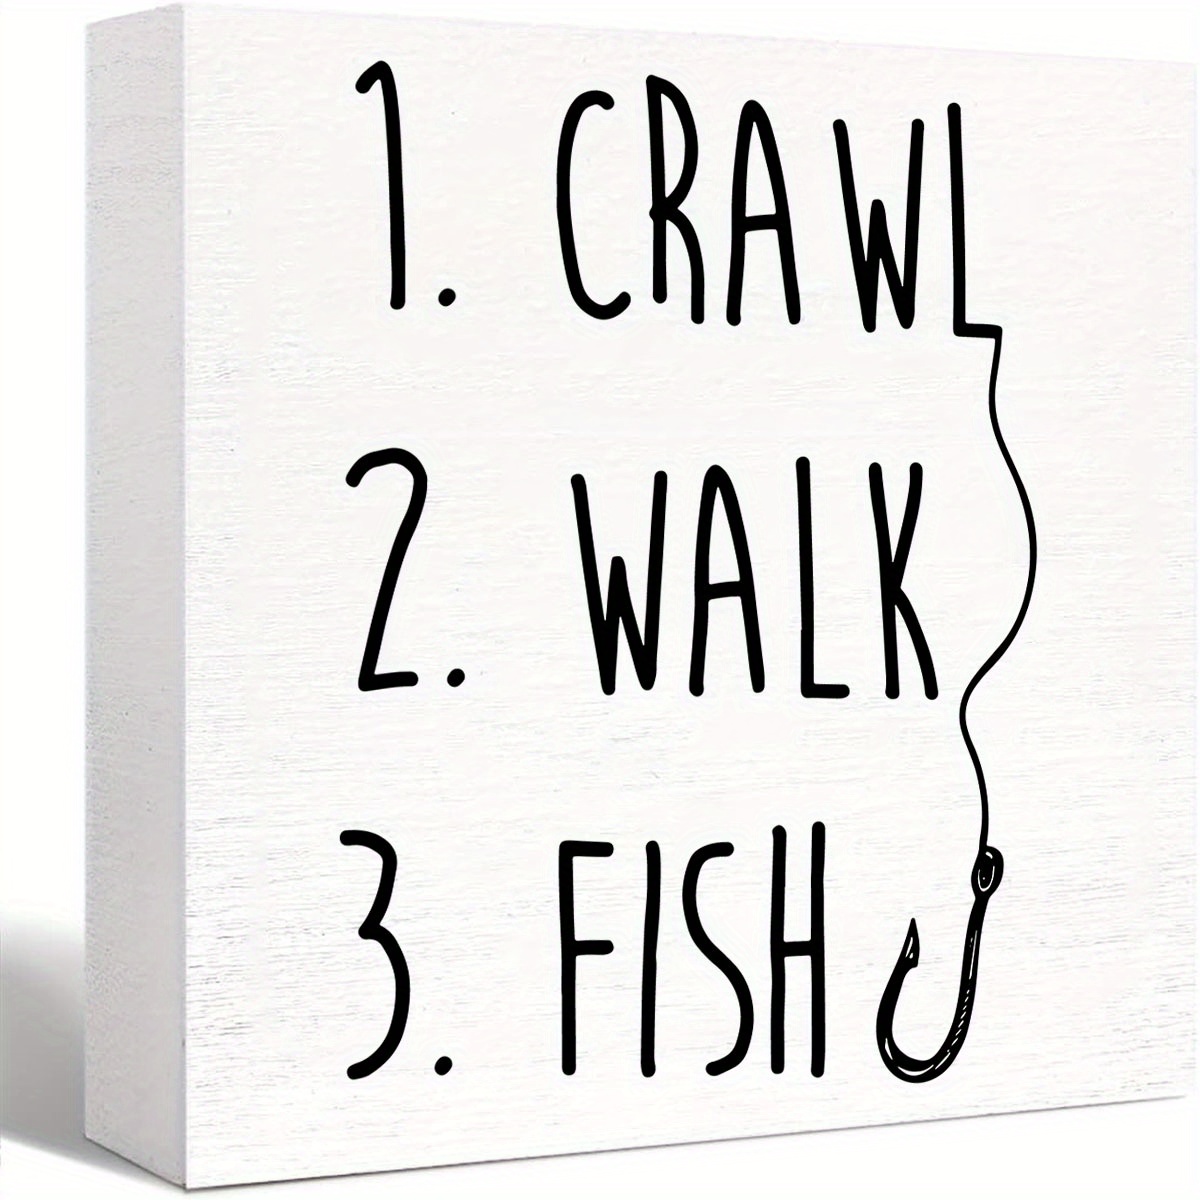 

1pc Rustic Wooden Sign, "crawl Walk Fish" Funny Baby Room Decor, Vintage Style Wood Block Desk Decoration For Nursery, Bedroom, Or Home Office Decor, Artificial Wood Craft